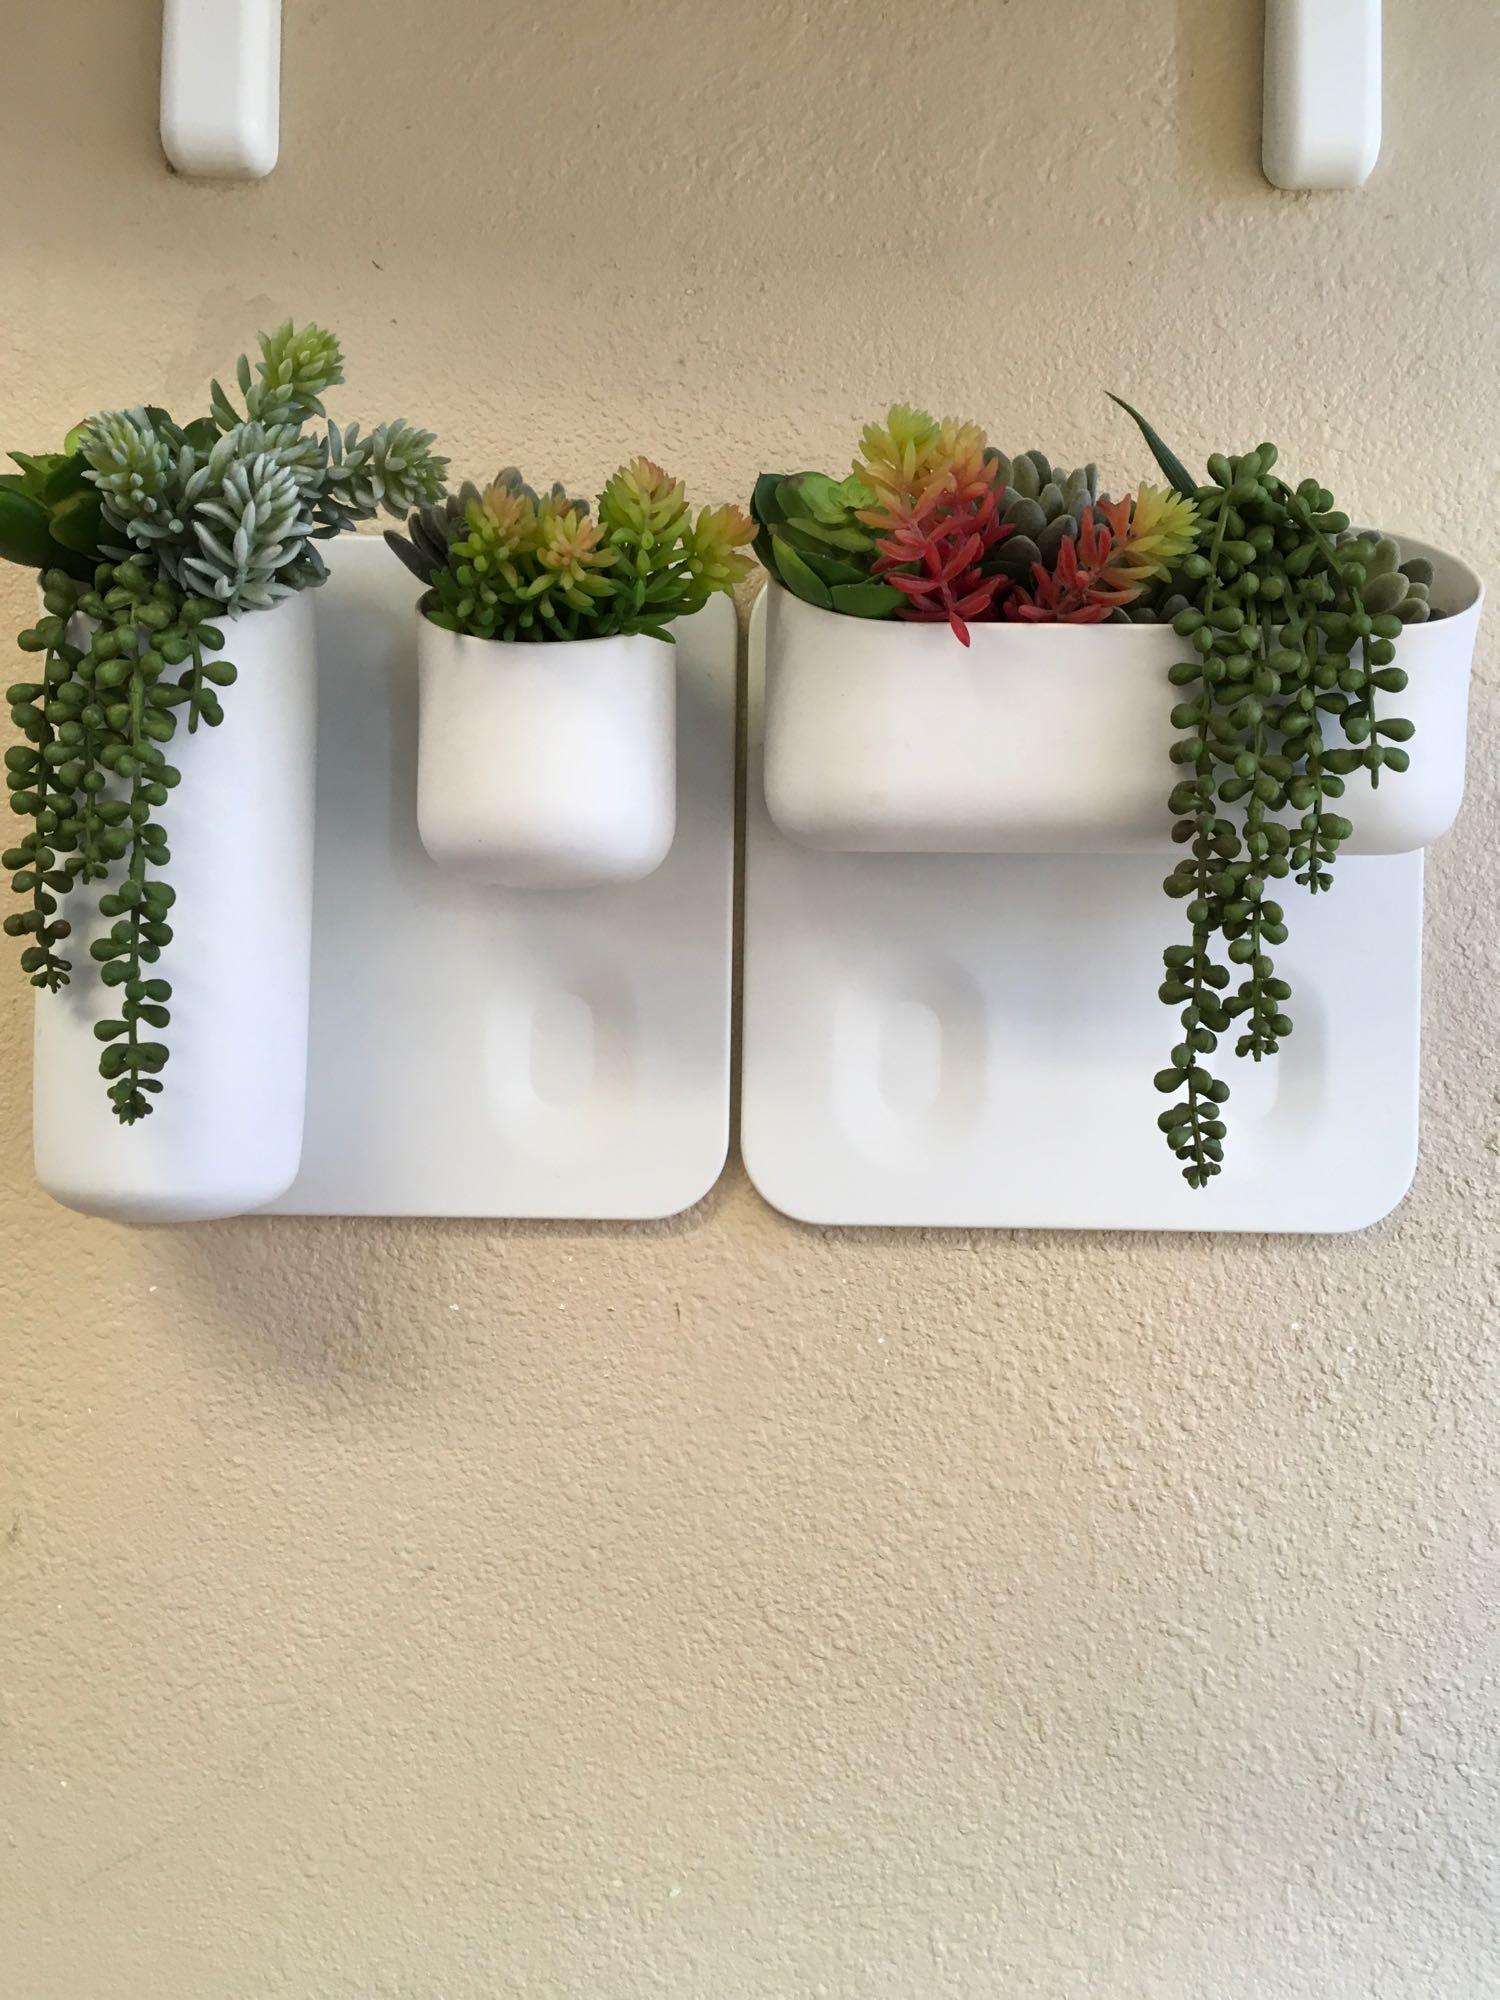 Wall Decor, Sconce Light Fixture, Shelf with Brackets, 2 Planters with Artificial Plants